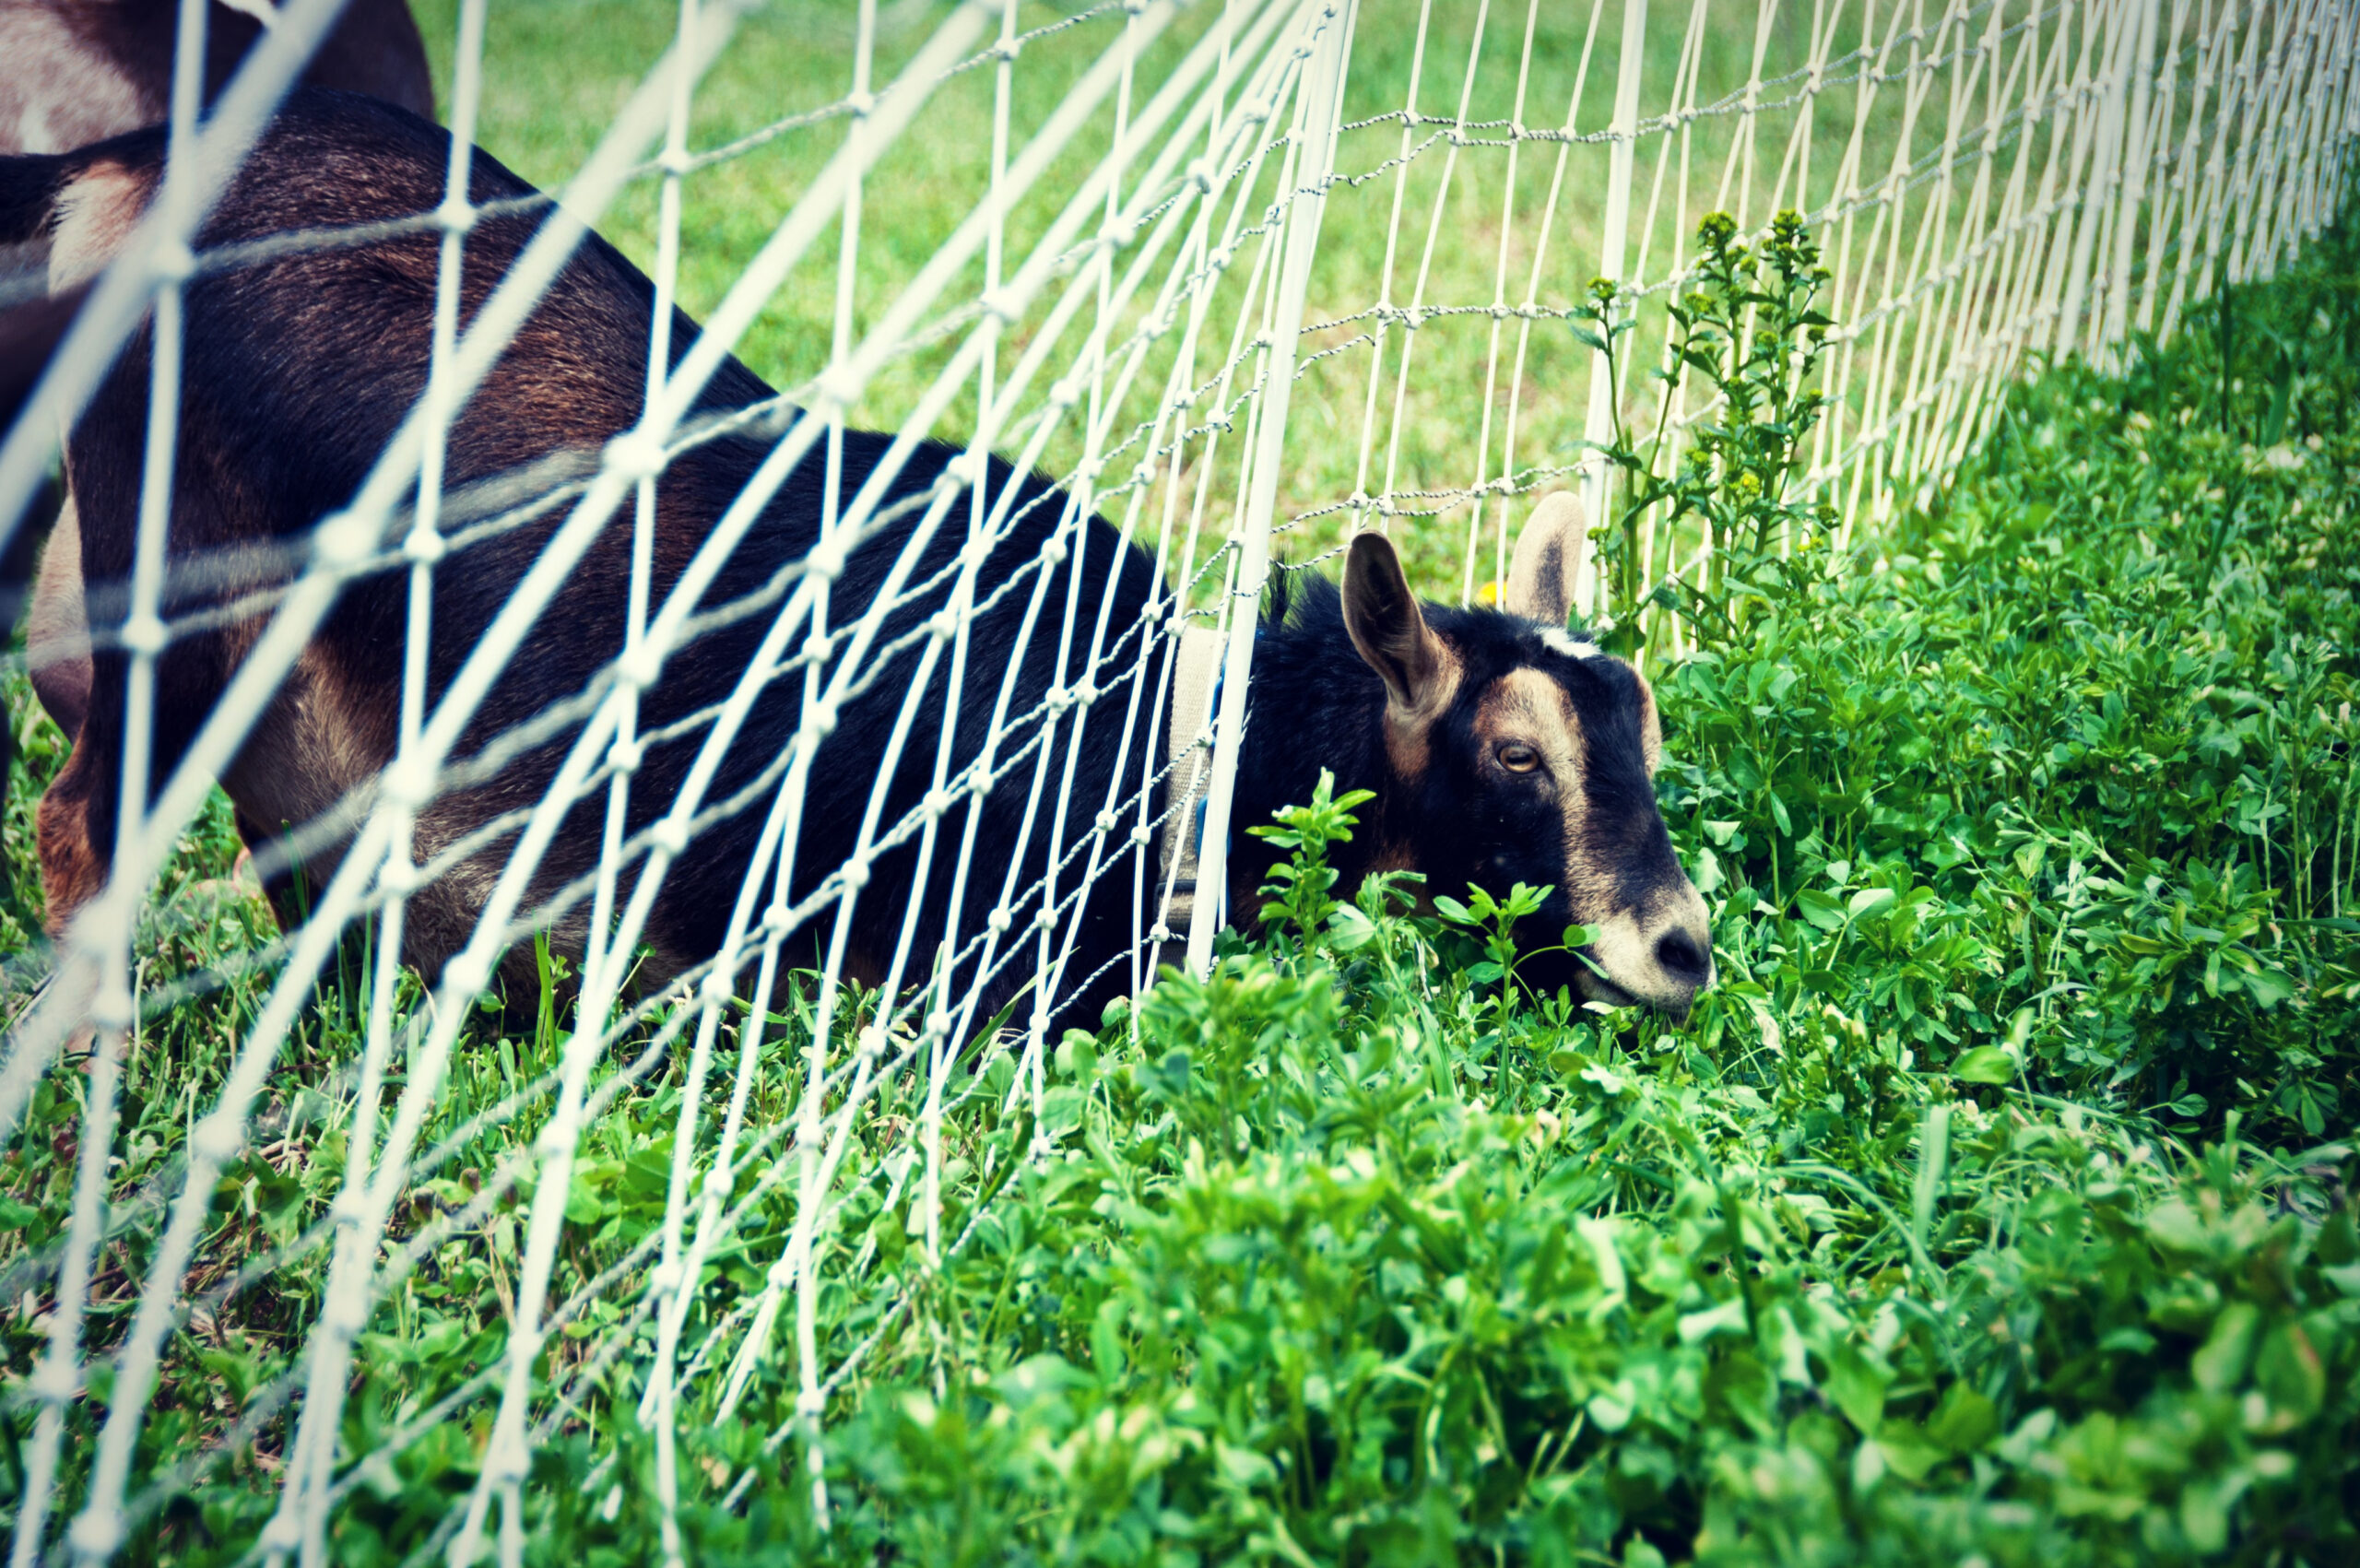 Goat with his head through a fence trying to eat the green grass on the other side